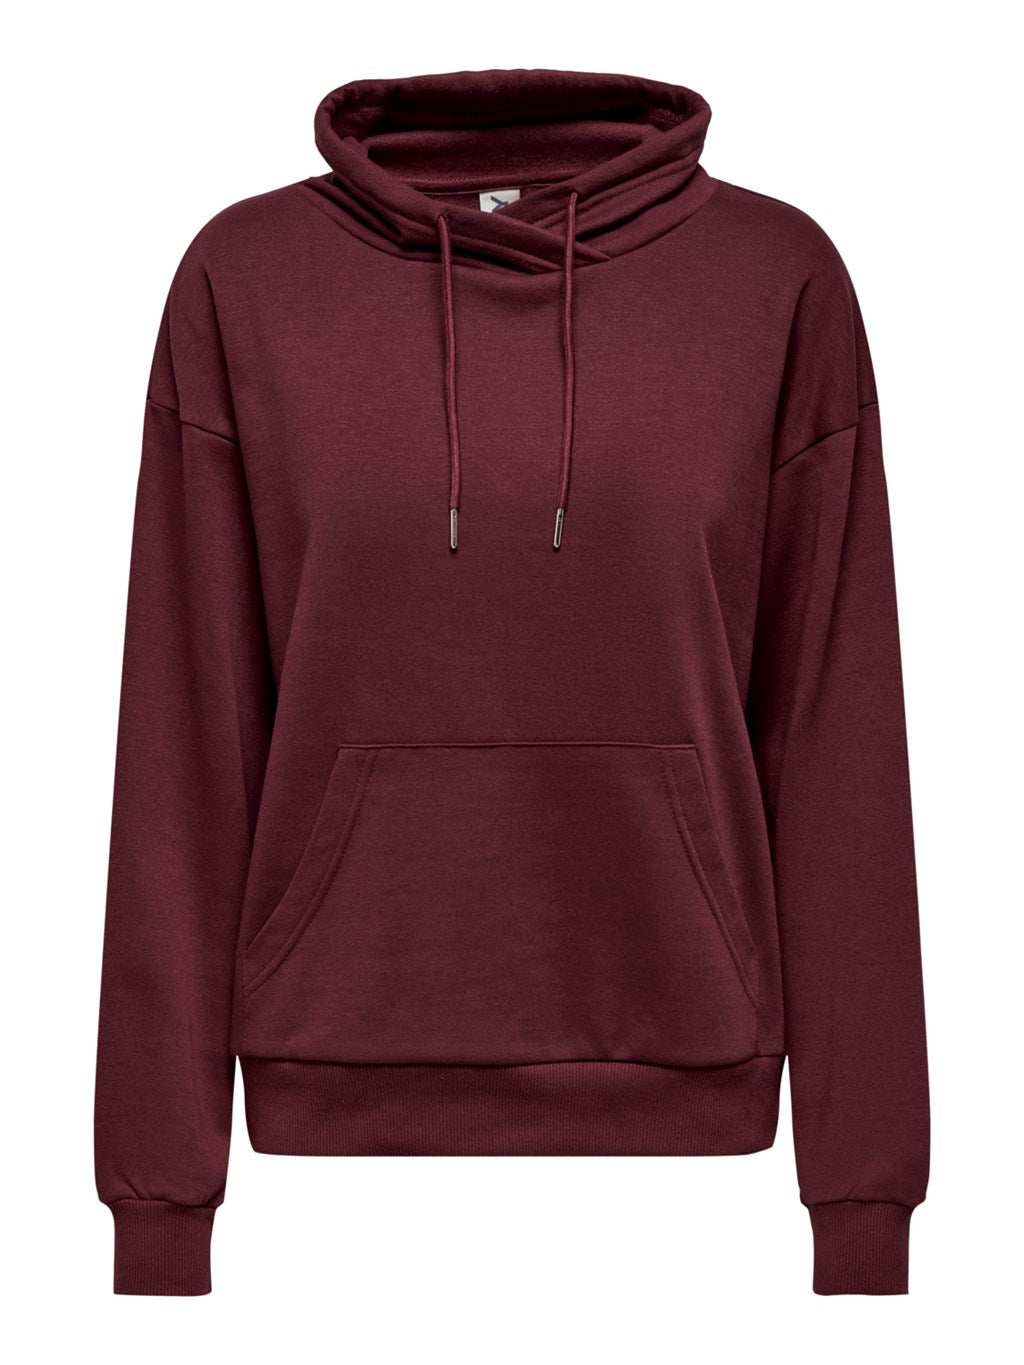 Hoodie Windsor bourgogne Only pour femme